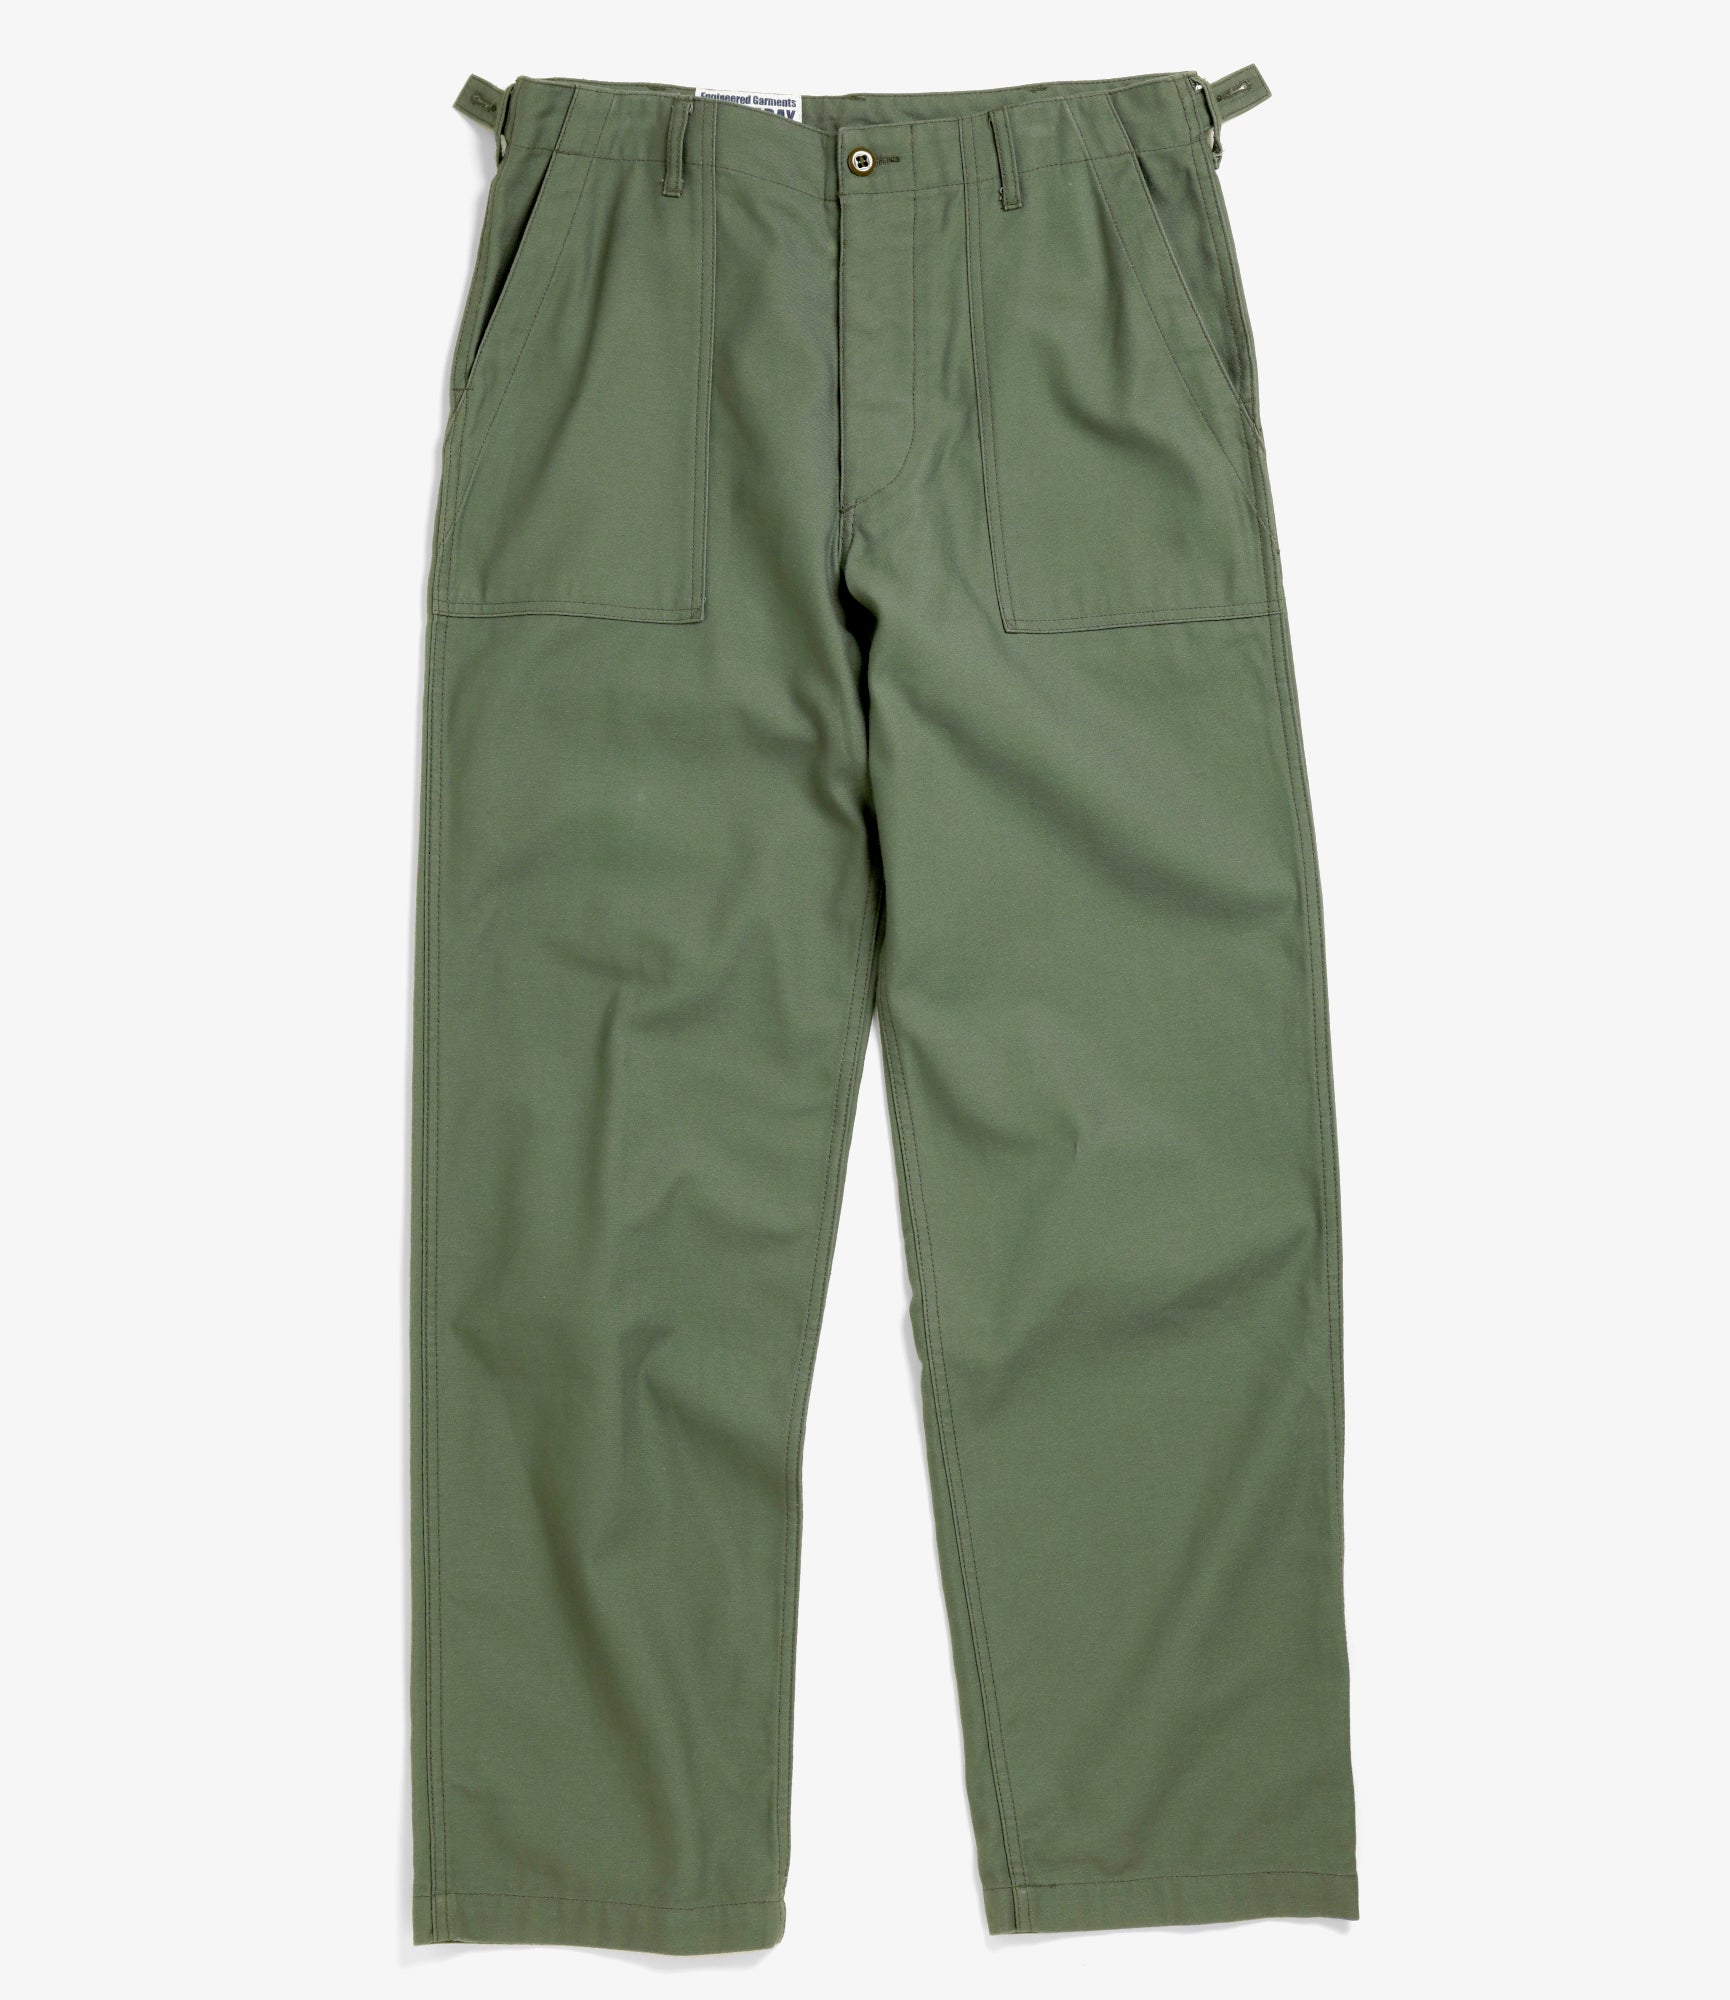 Engineered Garments Workaday Fatigue Pant Olive Cotton Reversed Sate  Nepenthes London